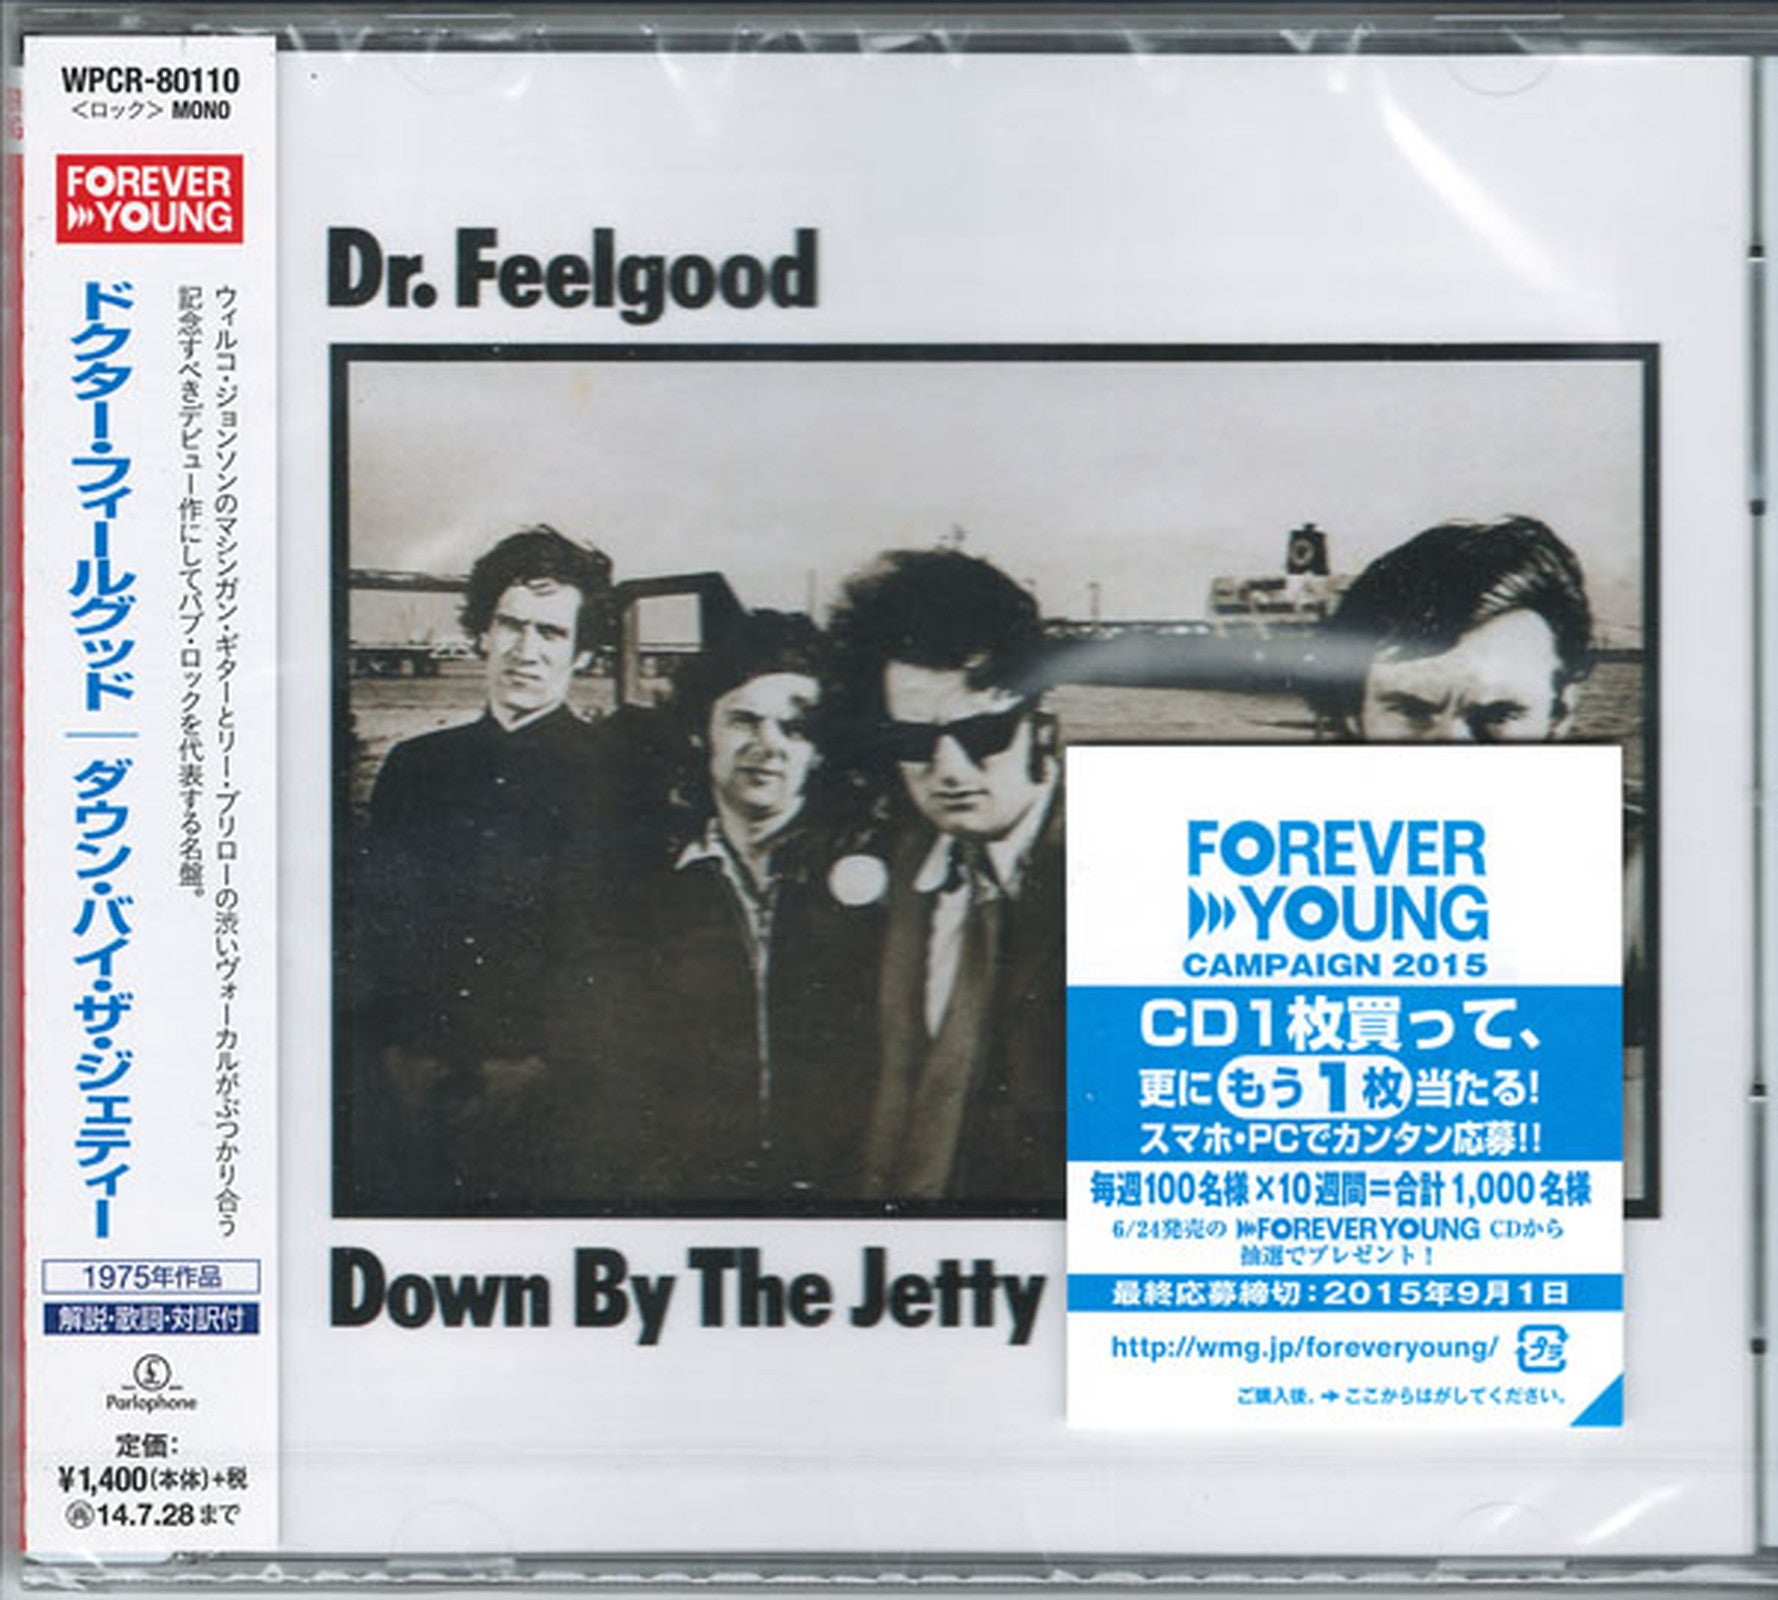 Dr.feelgood 1stアルバム down by the jetty - 洋楽